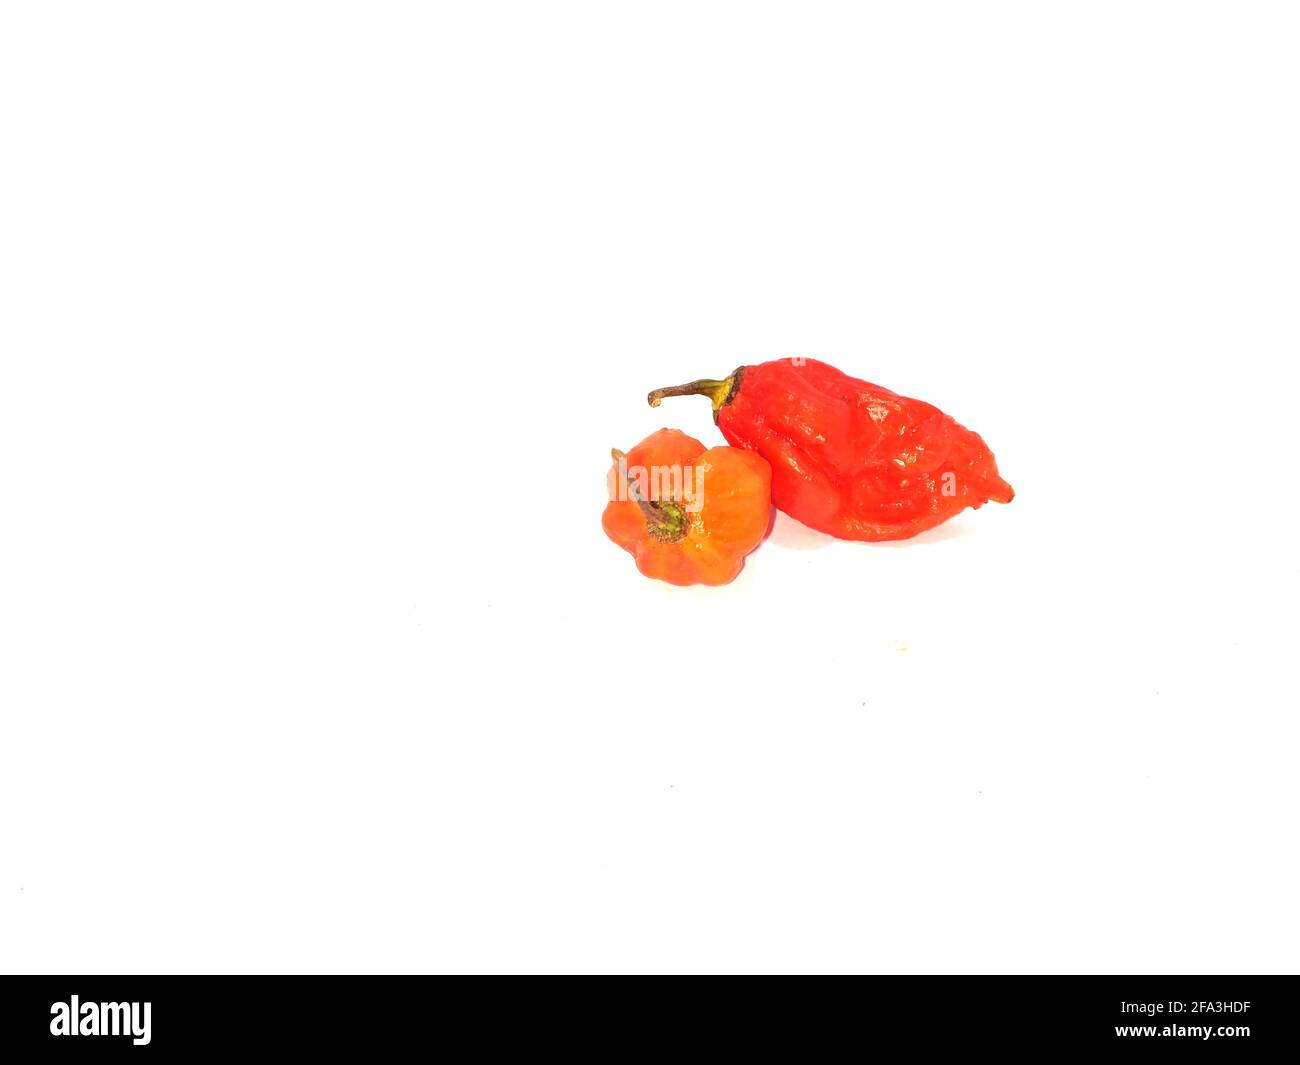 bhut jolokia ghost pepper isolated on white background. ghost pepper page border .bhut jolokia ghost pepper isolated on white background.bhut jolokia . Stock Photo